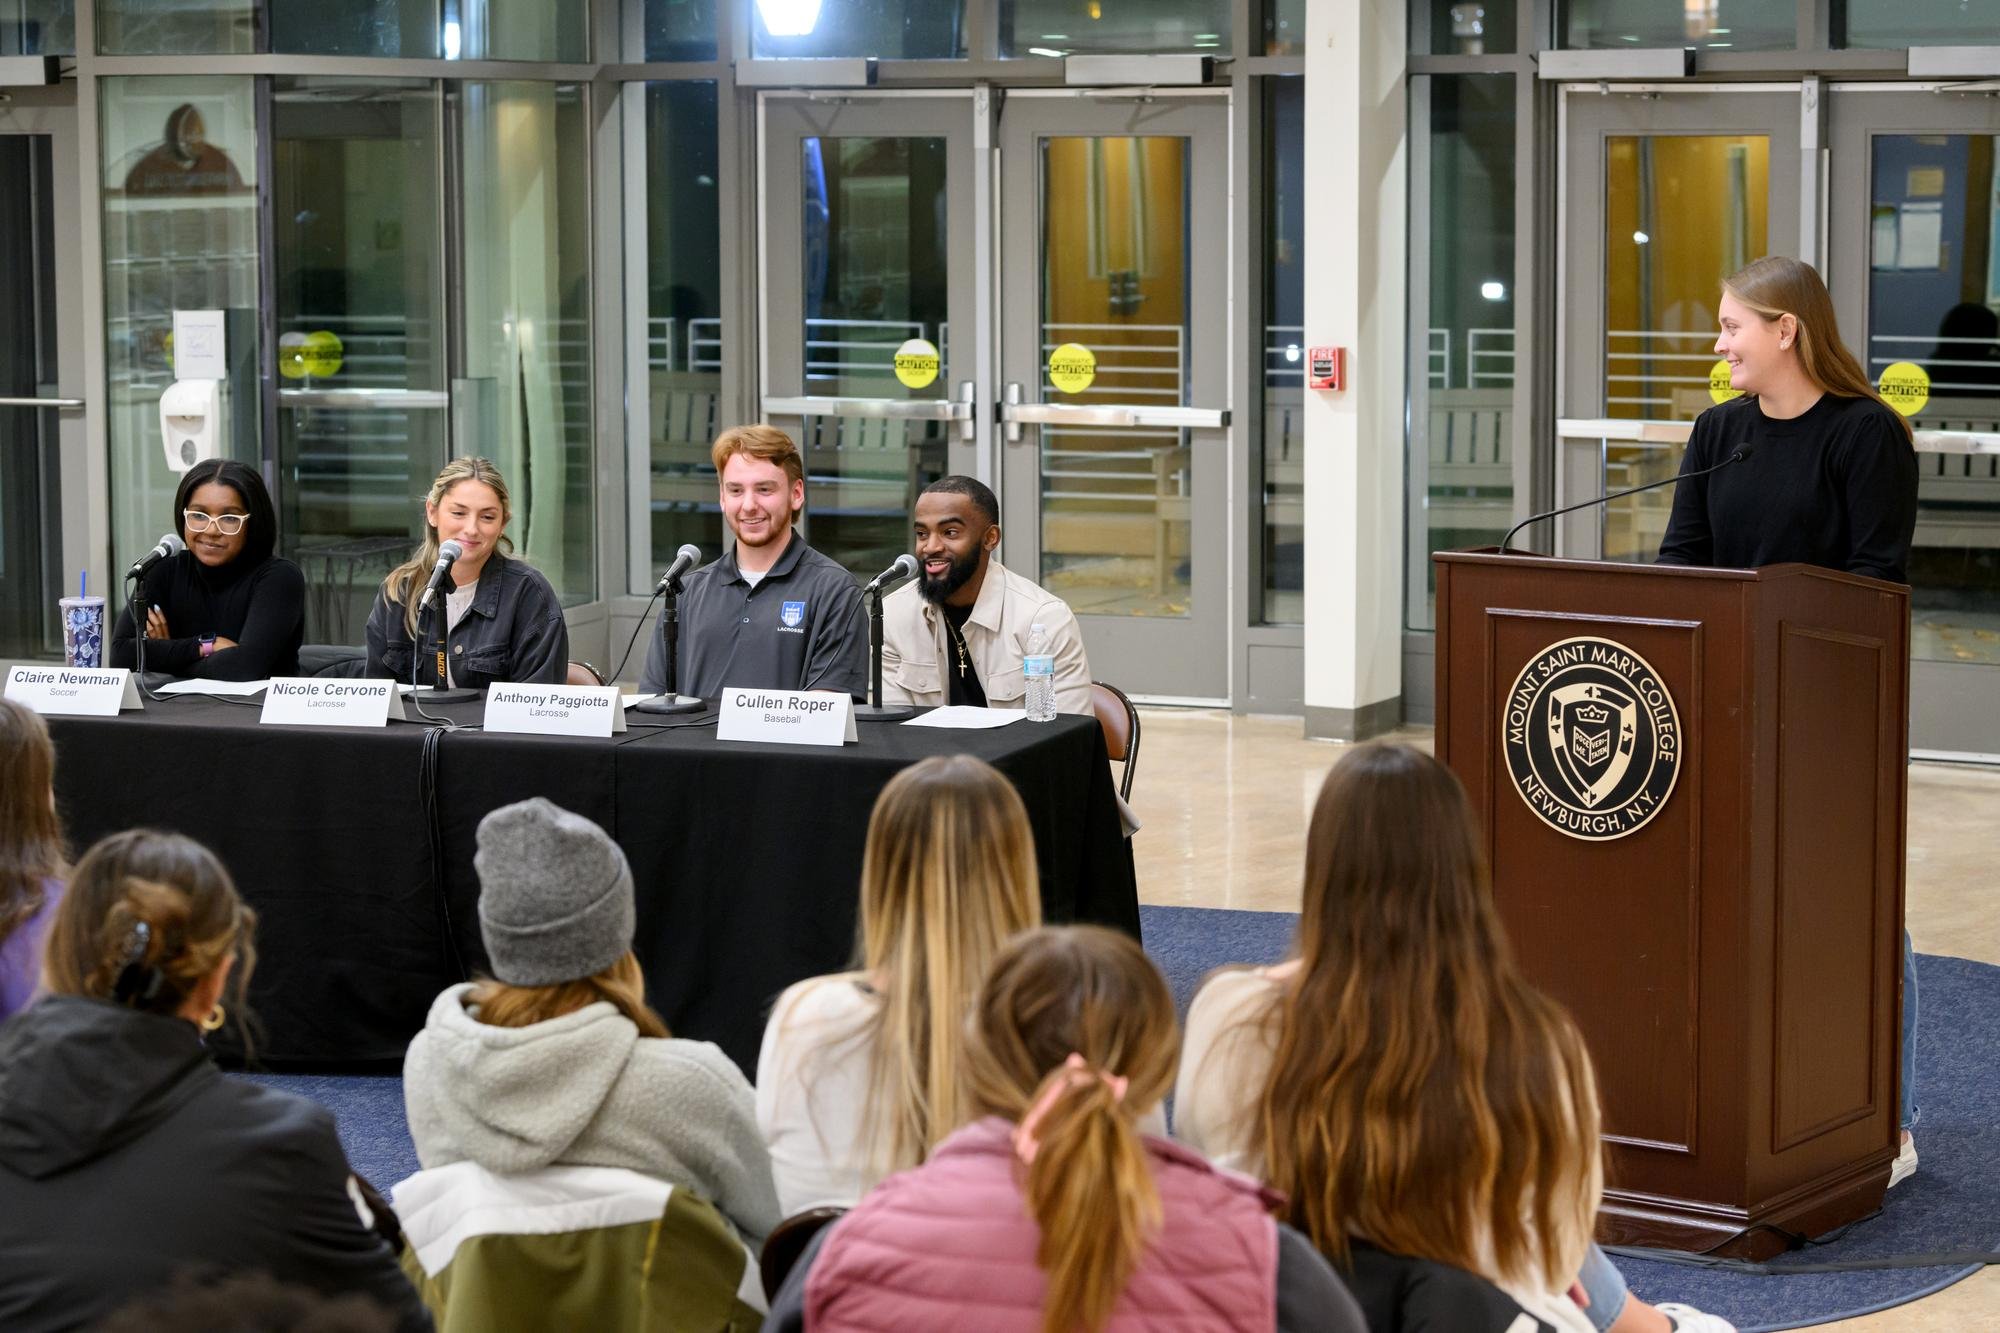   Mount alumni on the panel were, left to right: Claire Newman, Nicole Cervone, Anthony Paggiotta, and Cullen Roper.  